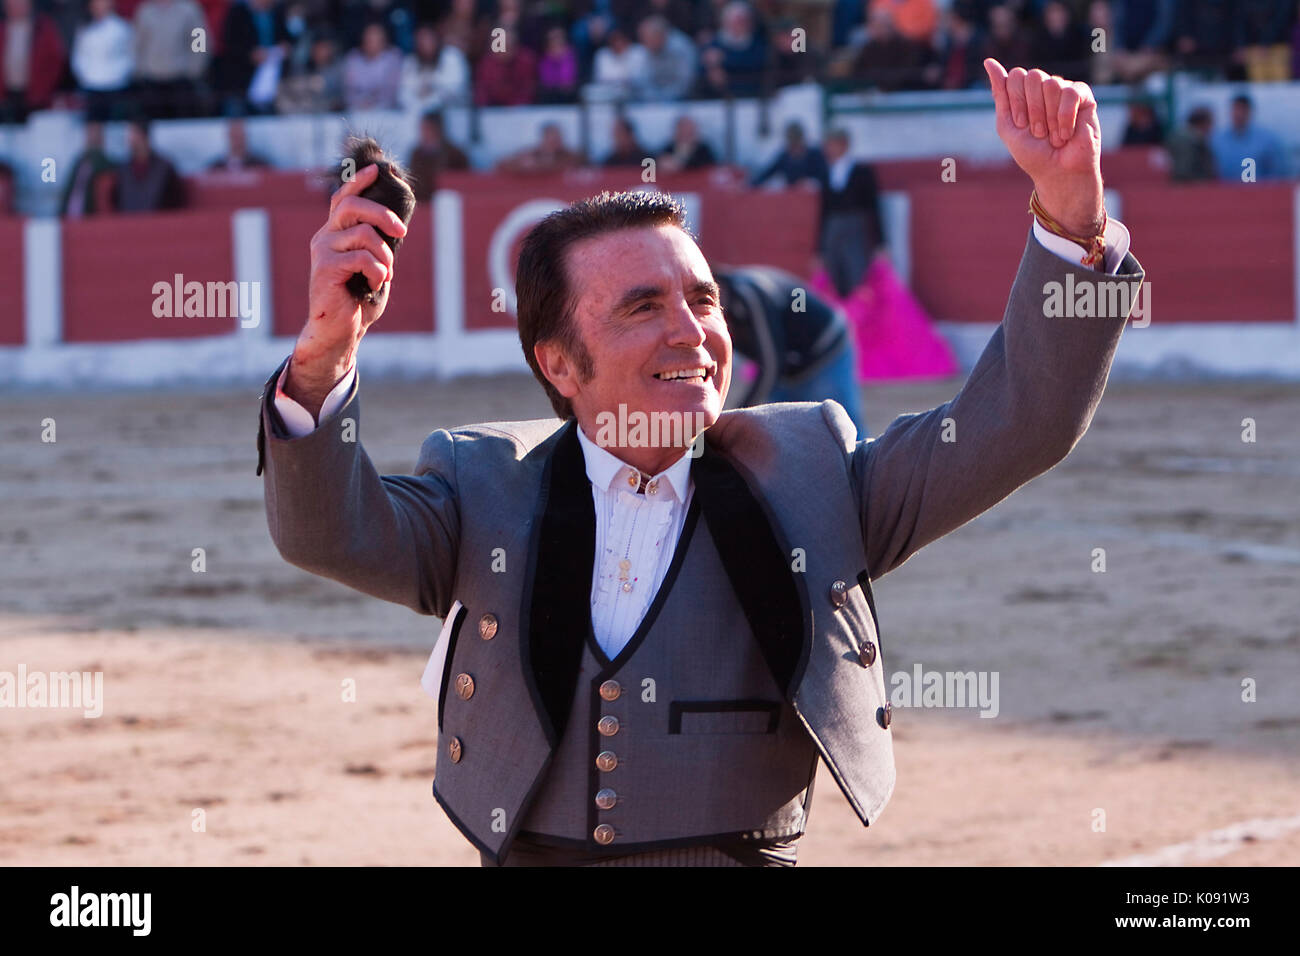 The Spanish Bullfighter Jose Ortega Cano to the turning of honour with an ear in his hand, Linares, province of Jaen, Spain, 14 march 2010 Stock Photo